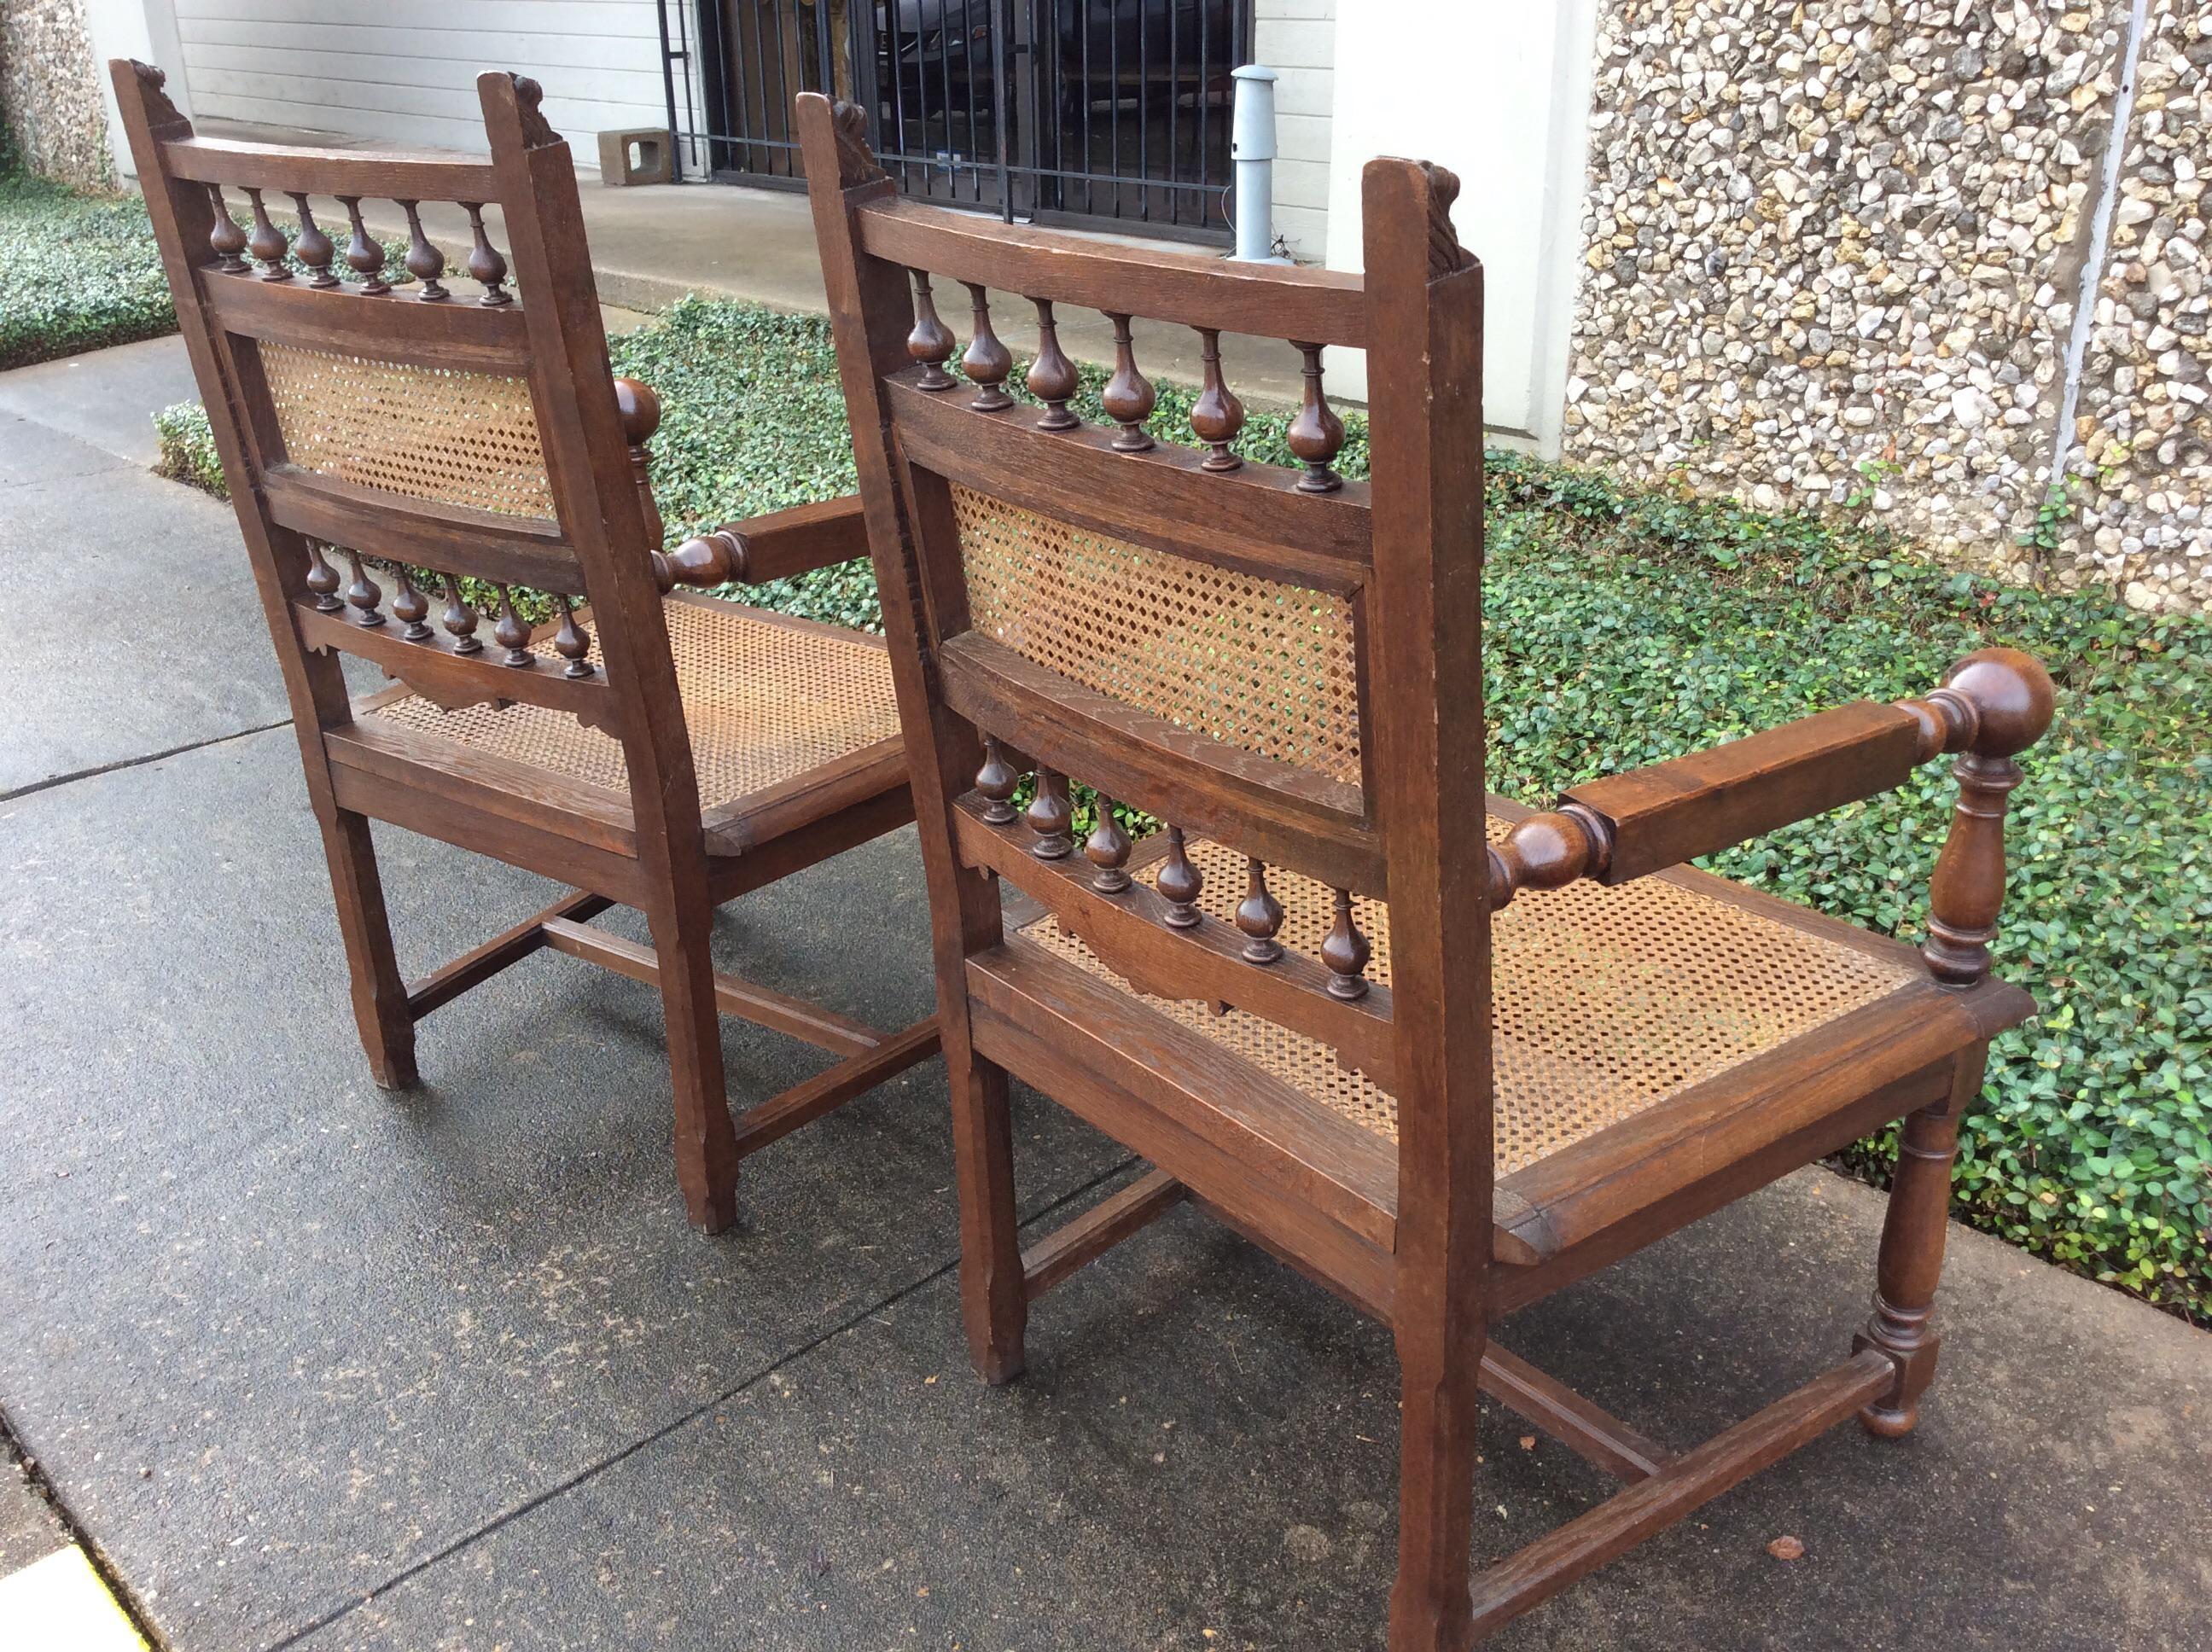 A wonderful Pair of French Cane Seat Armchairs, Late 19th century. Perfect as accent chairs in any room. Carved details and cane seat and back. Some imperfections in cane due to age and use.

Each chair measures: 27.5